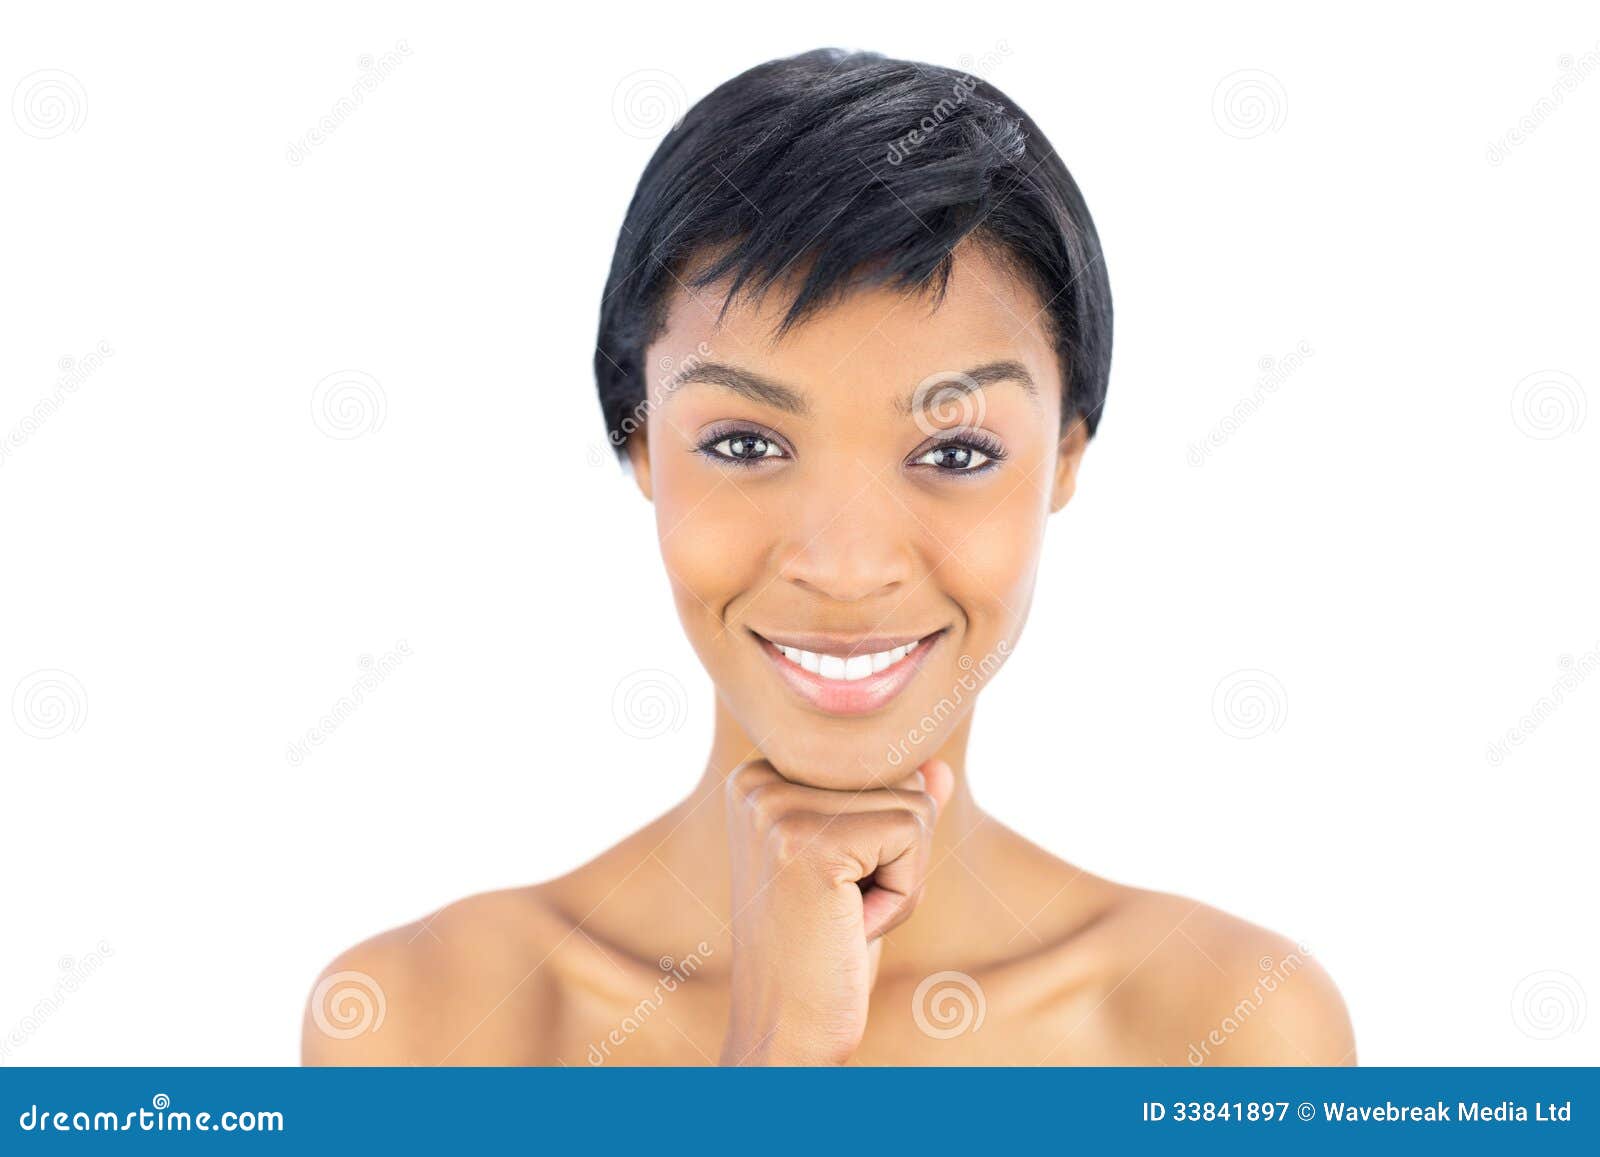 Joyful Black Haired Woman Posing Looking At Camera Stock Image Image Of Young Women 33841897 